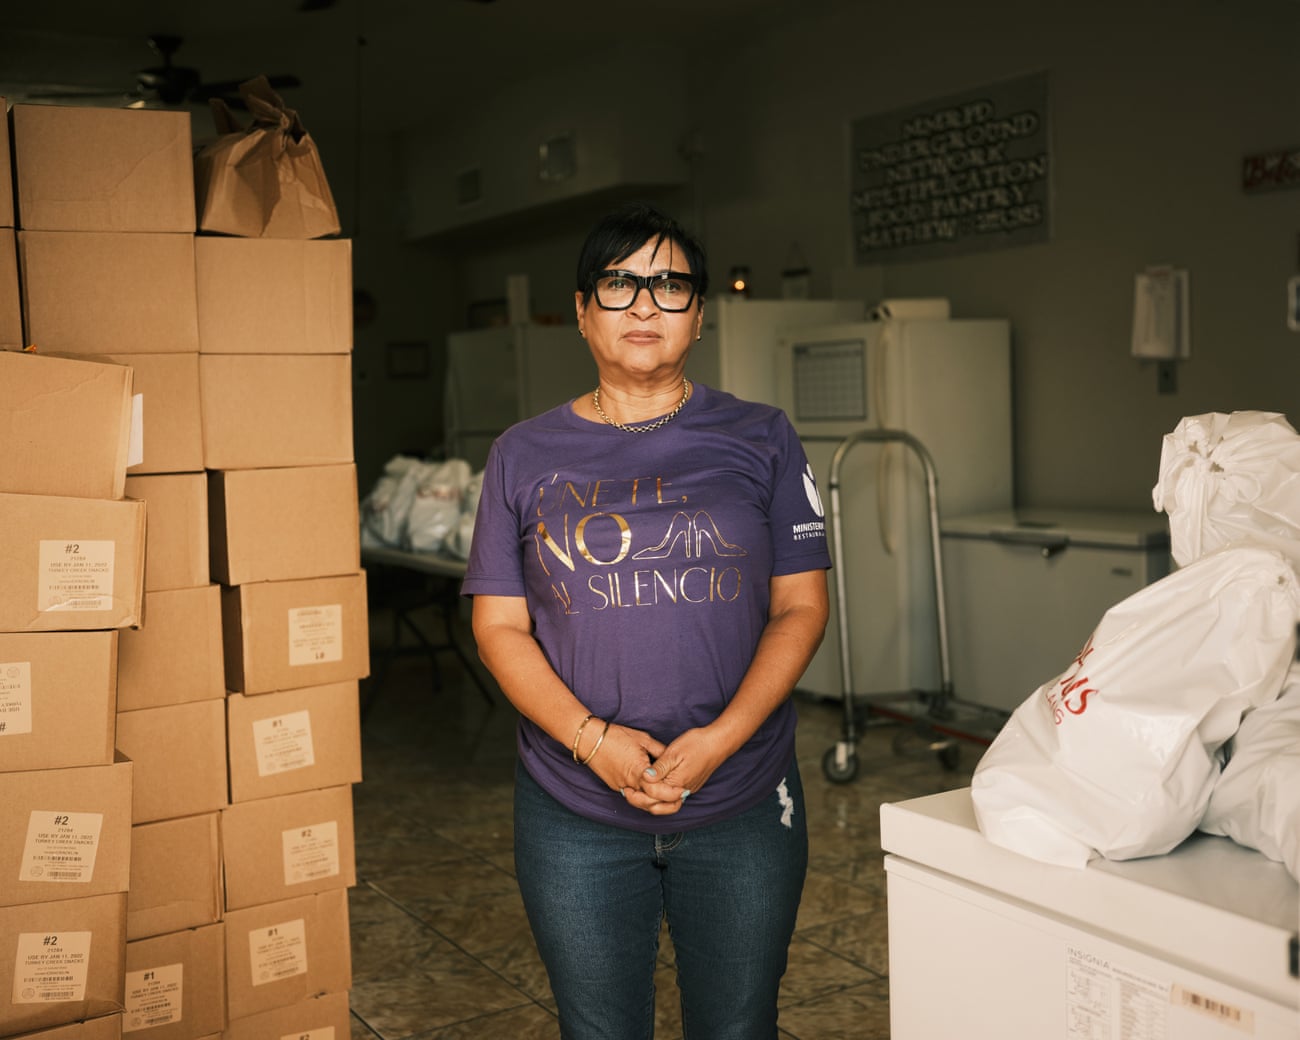 A woman in glasses and a purple shirt stands in the portrait next to several stacks of boxes taller than her height.